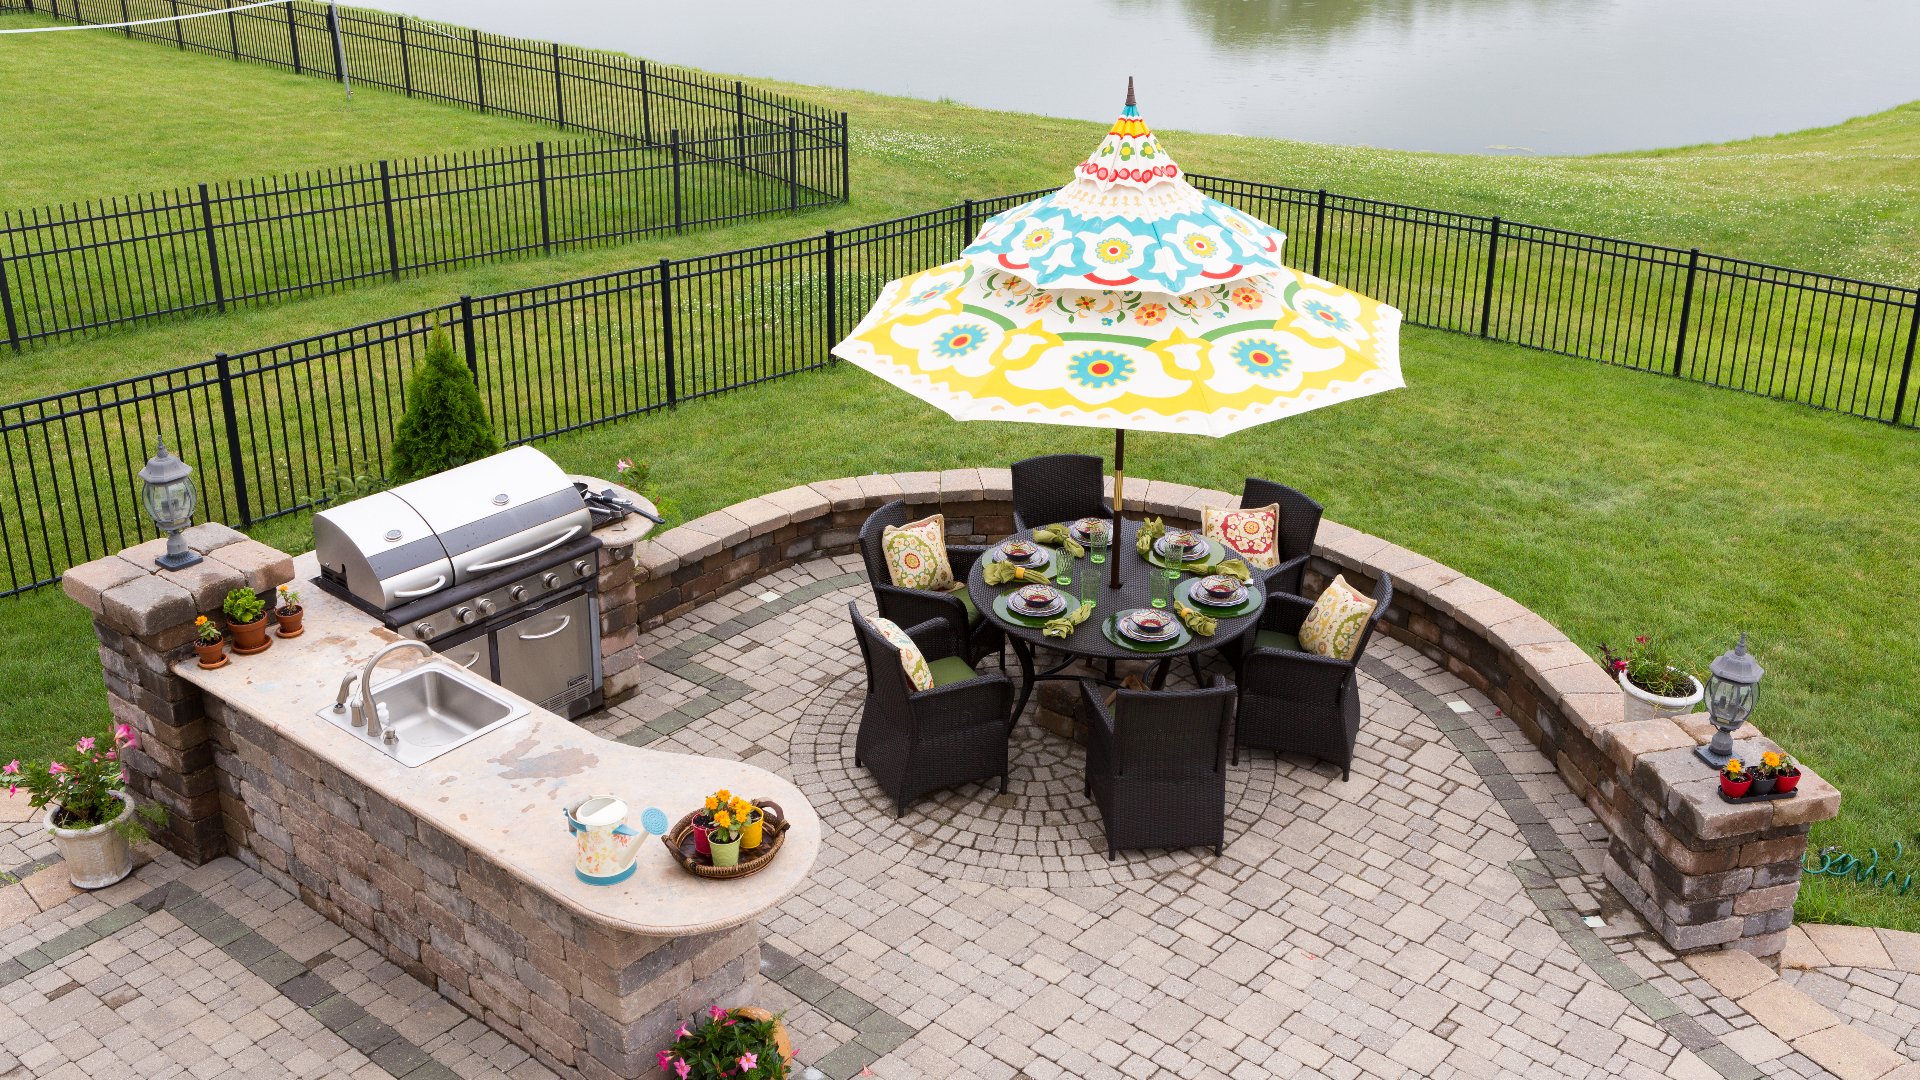 4 Features That Can Take Your Outdoor Living Space to the Next Level